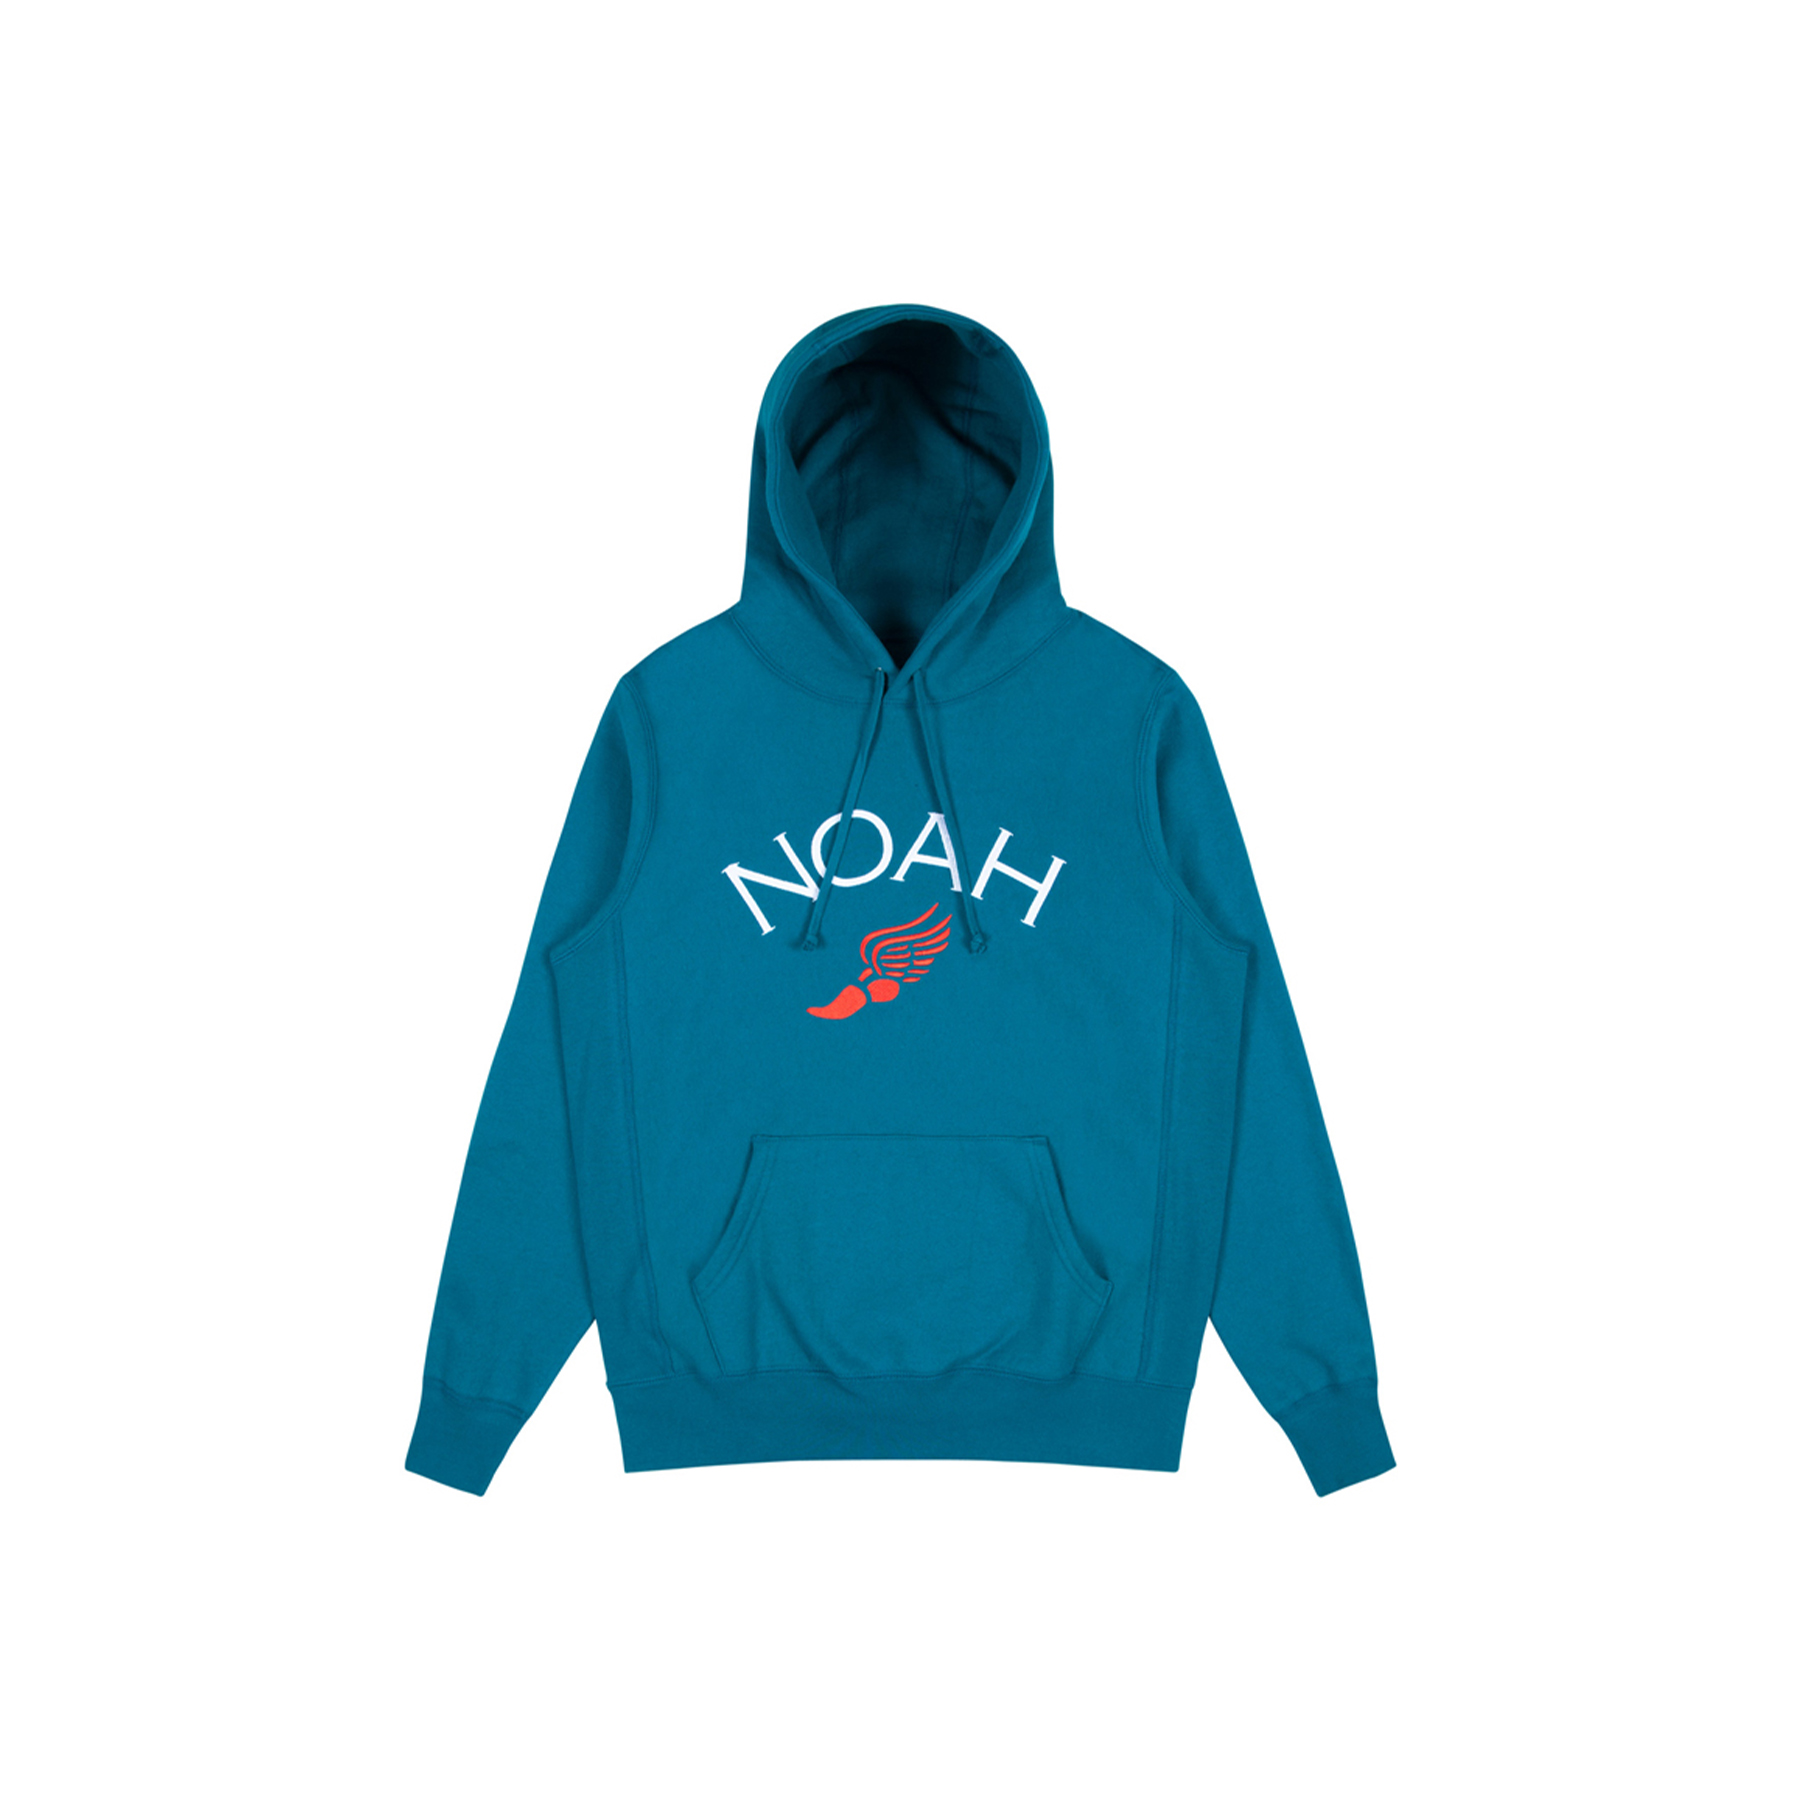 NOAH Embroidered Winged Foot Hoodie Release 2020 | Drops